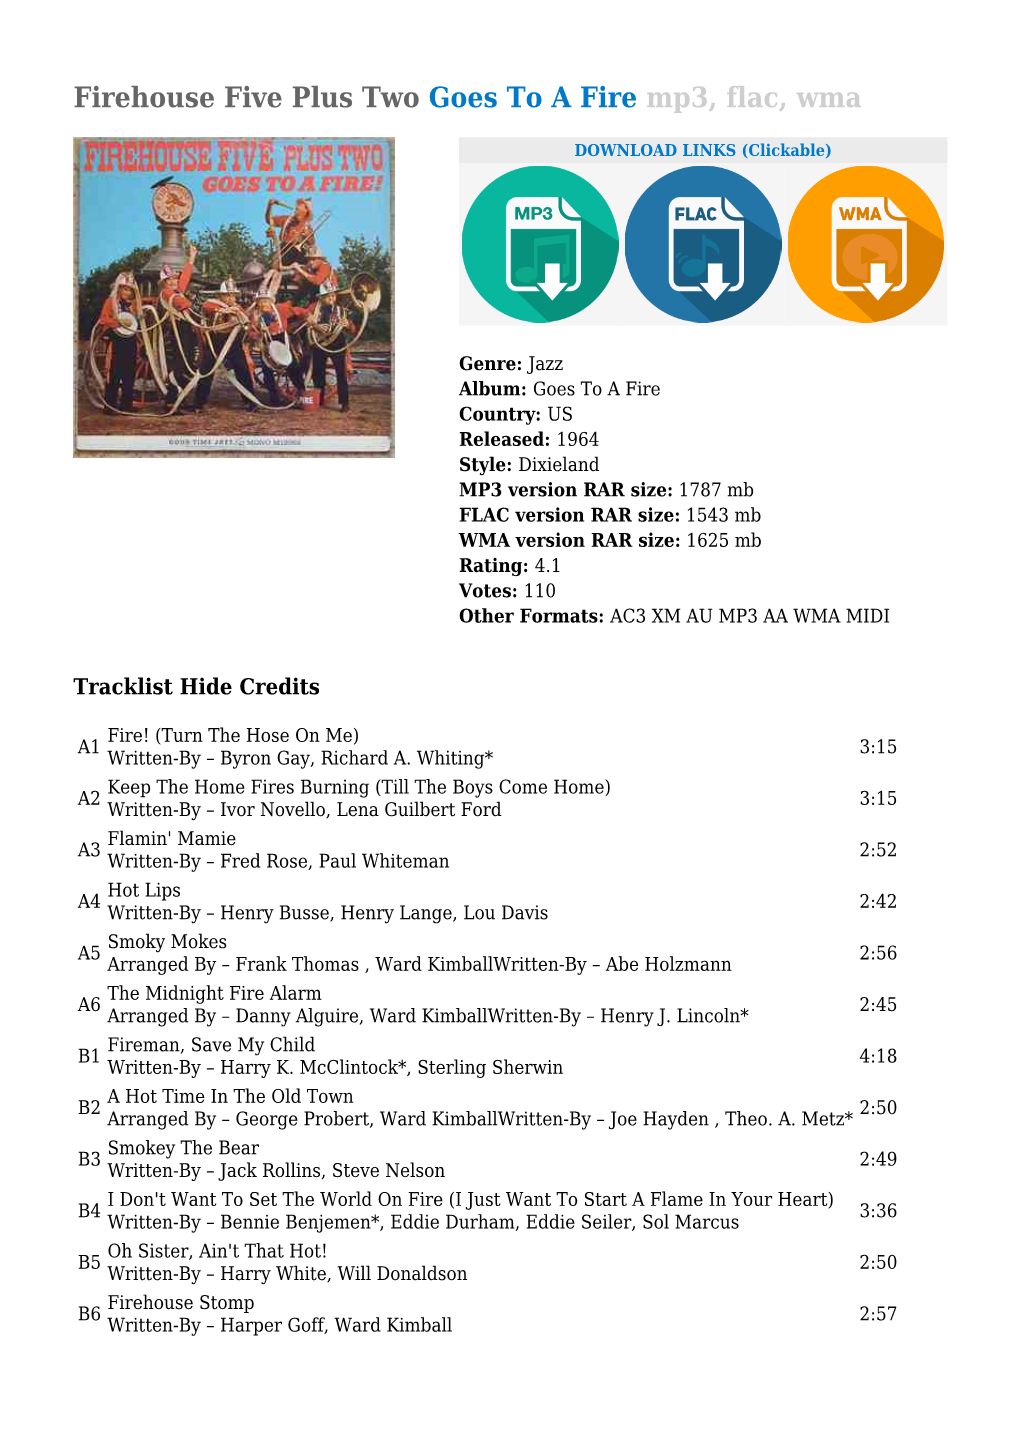 Firehouse Five Plus Two Goes to a Fire Mp3, Flac, Wma